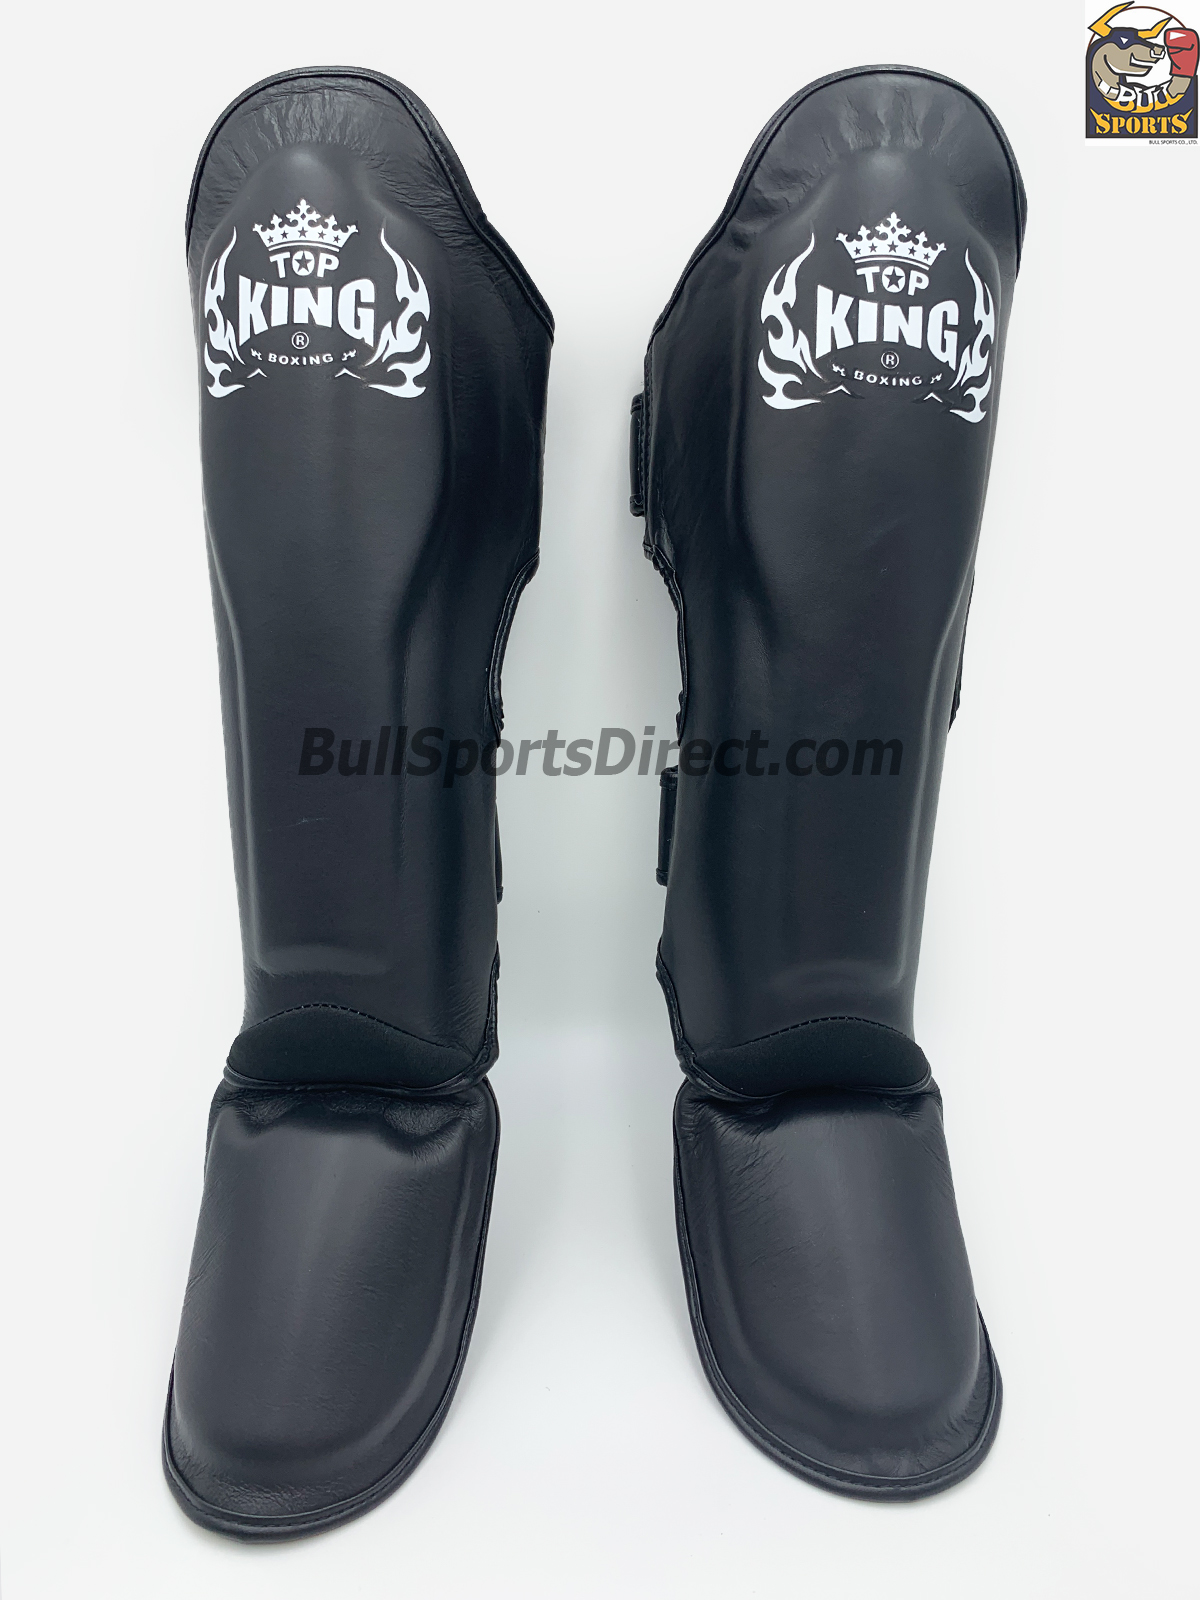 Top King Shin Pads Pro Leather Black 